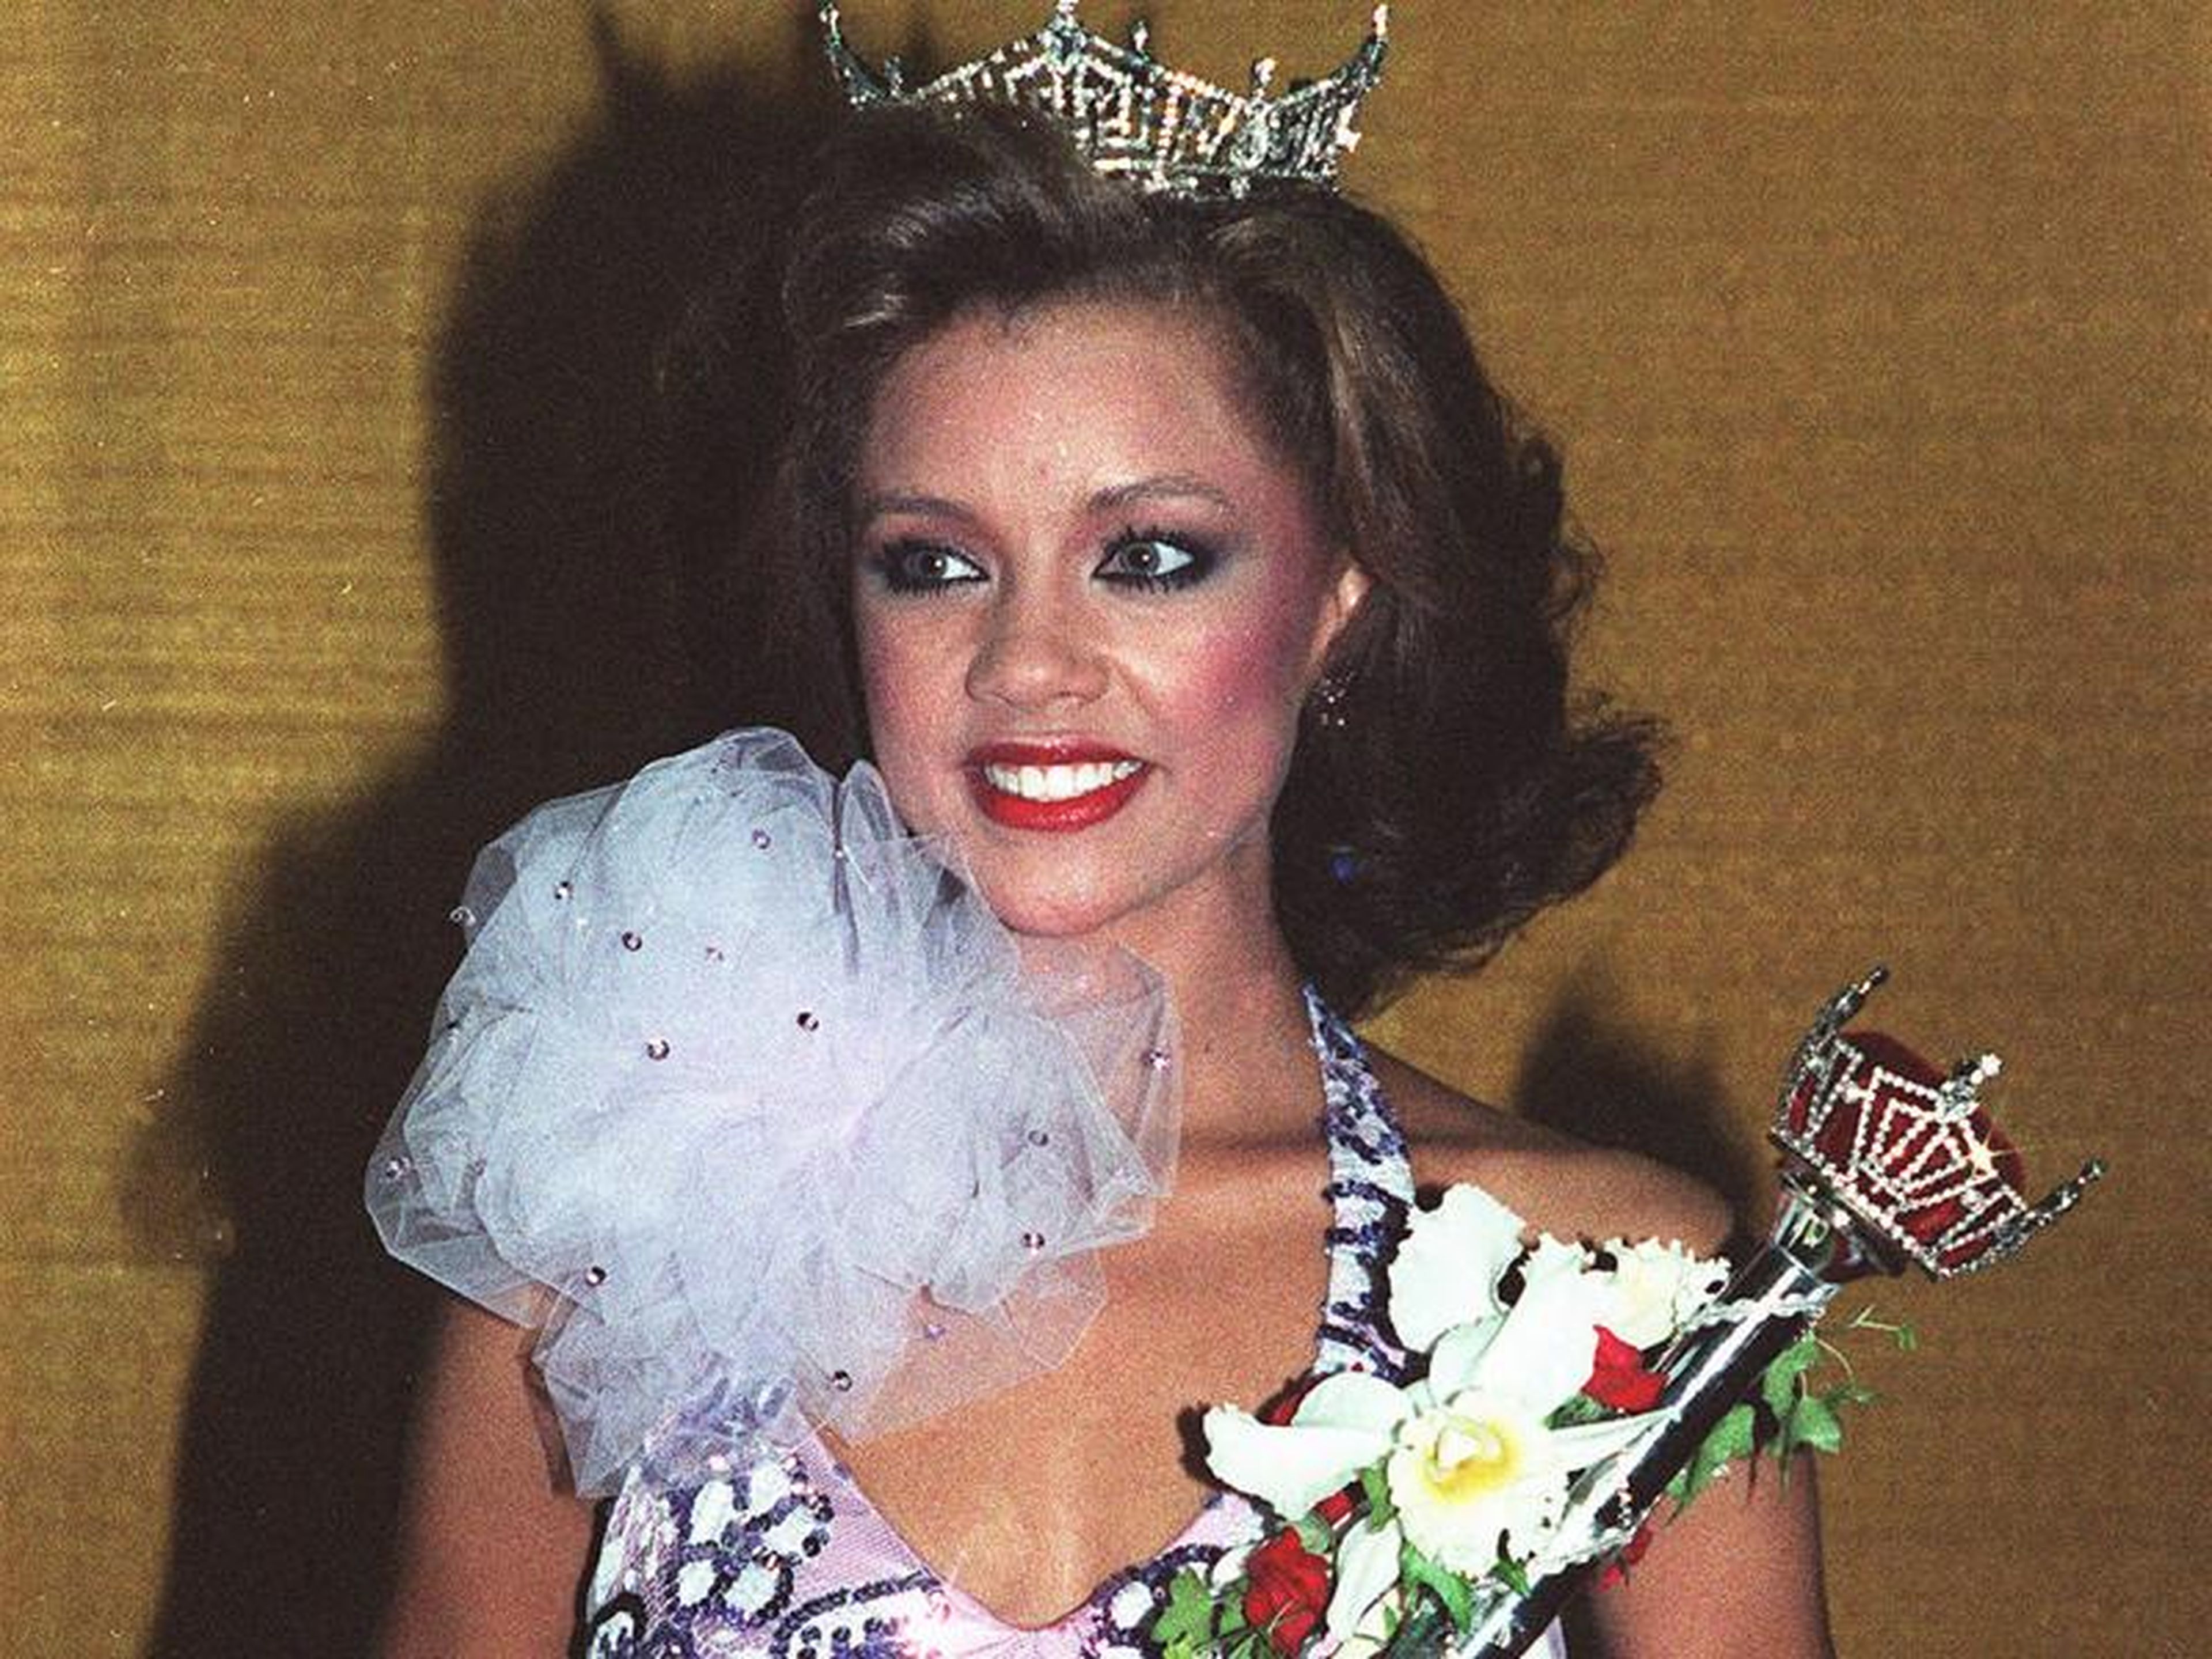 Vanessa Williams became the first African-American winner of the 1984 Miss America pageant.